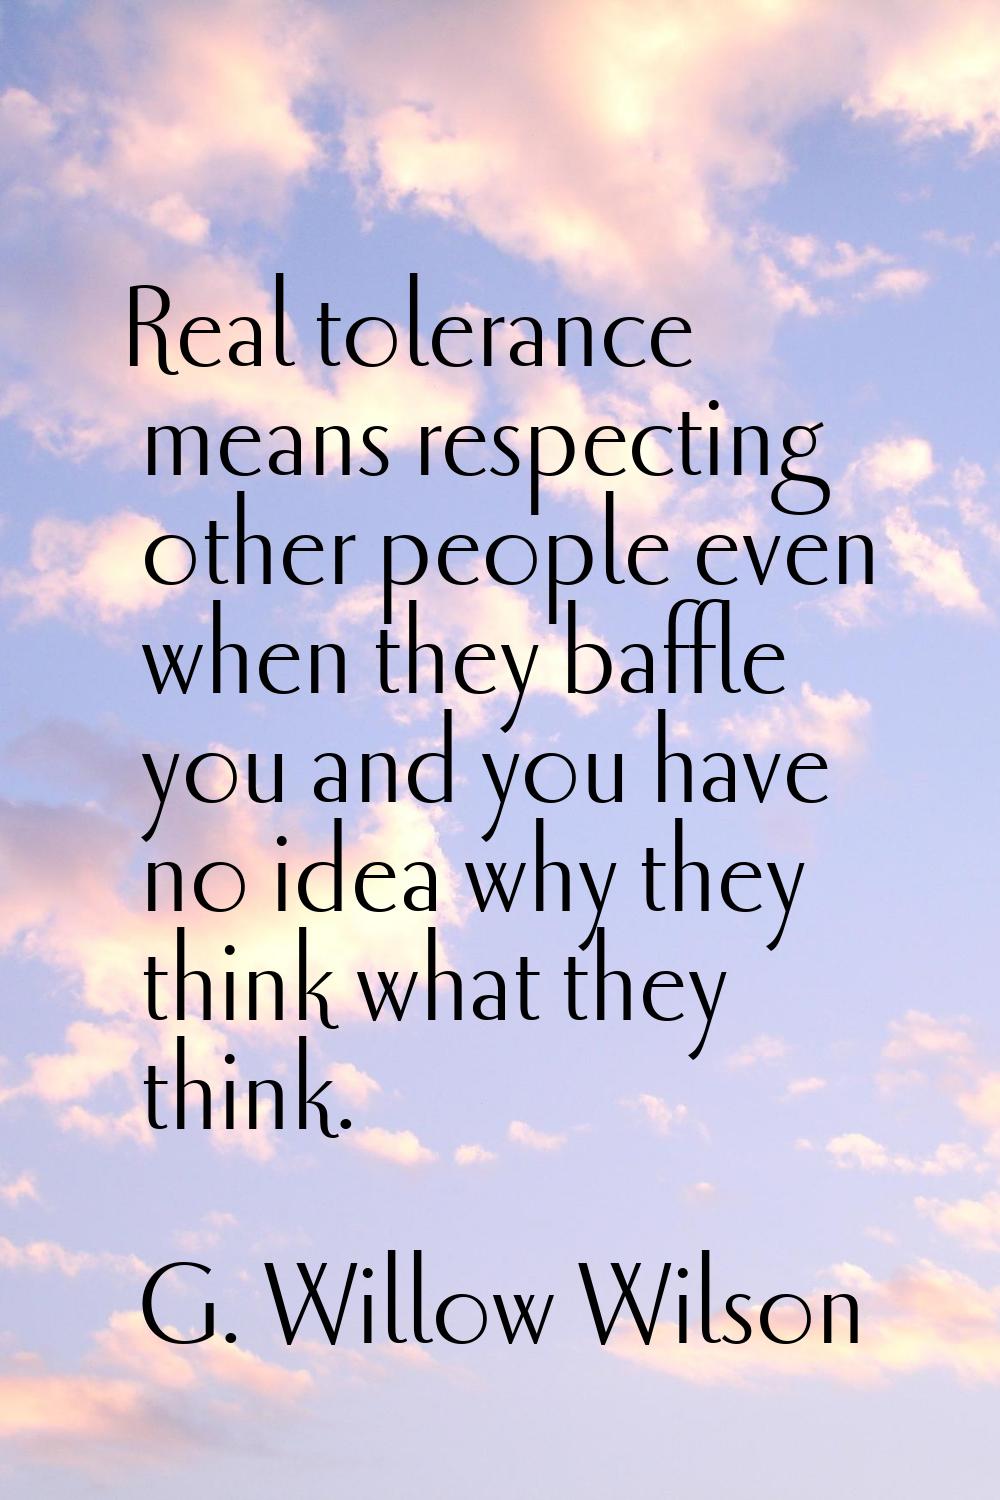 Real tolerance means respecting other people even when they baffle you and you have no idea why the